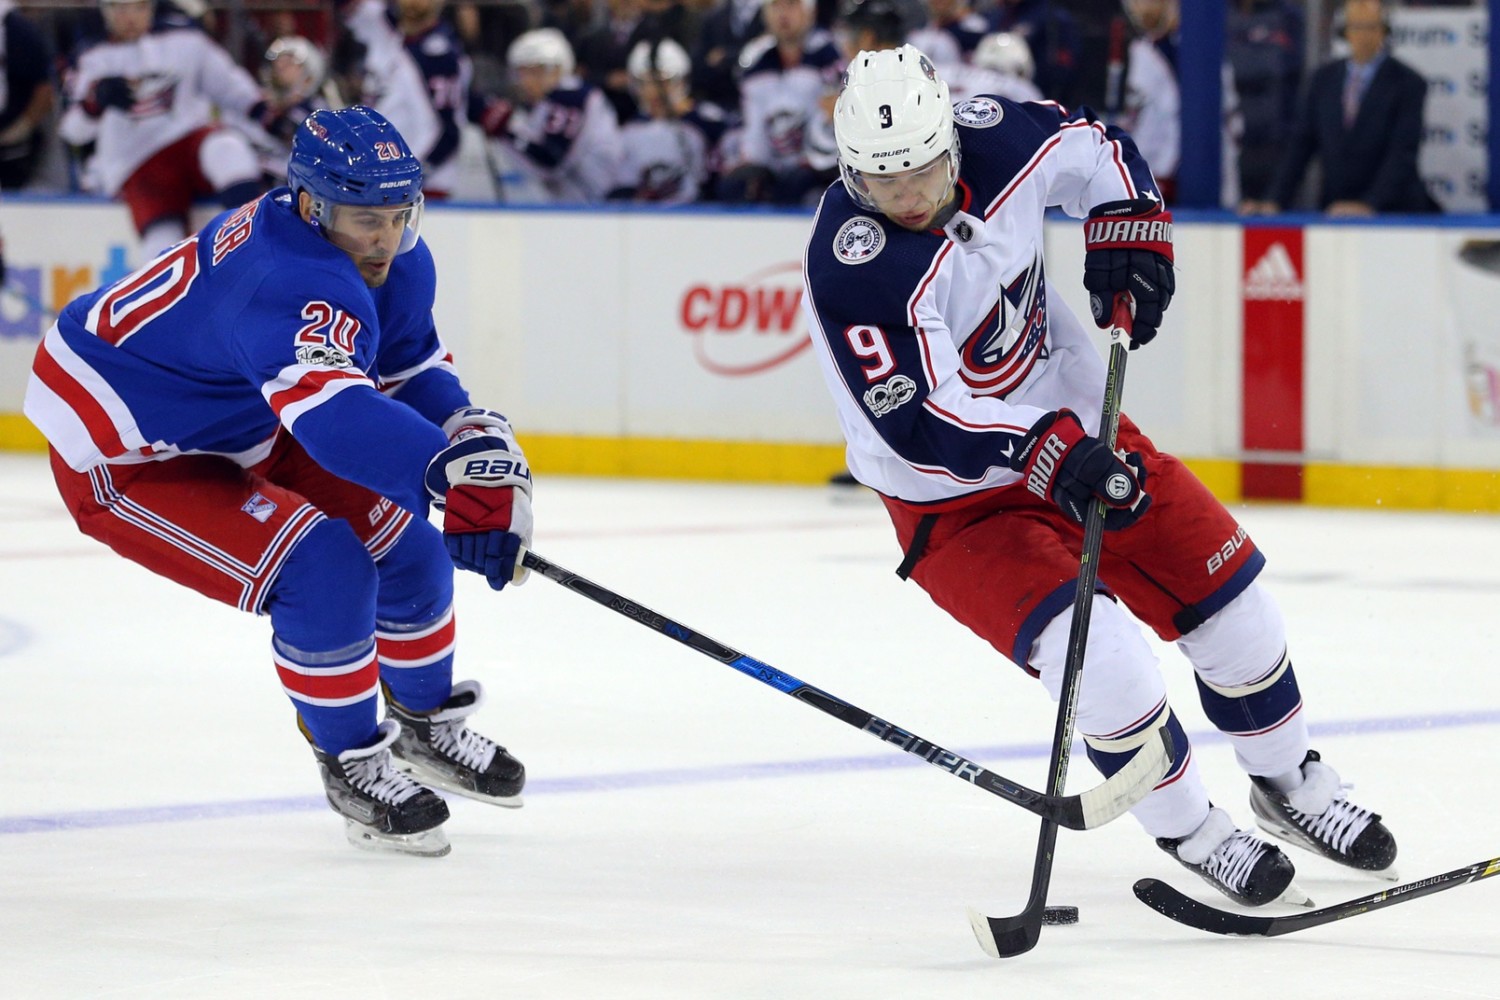 The New York Rangers and New York Islanders will be interested in Artemi Panarin if he goes to free agency on July 1st.